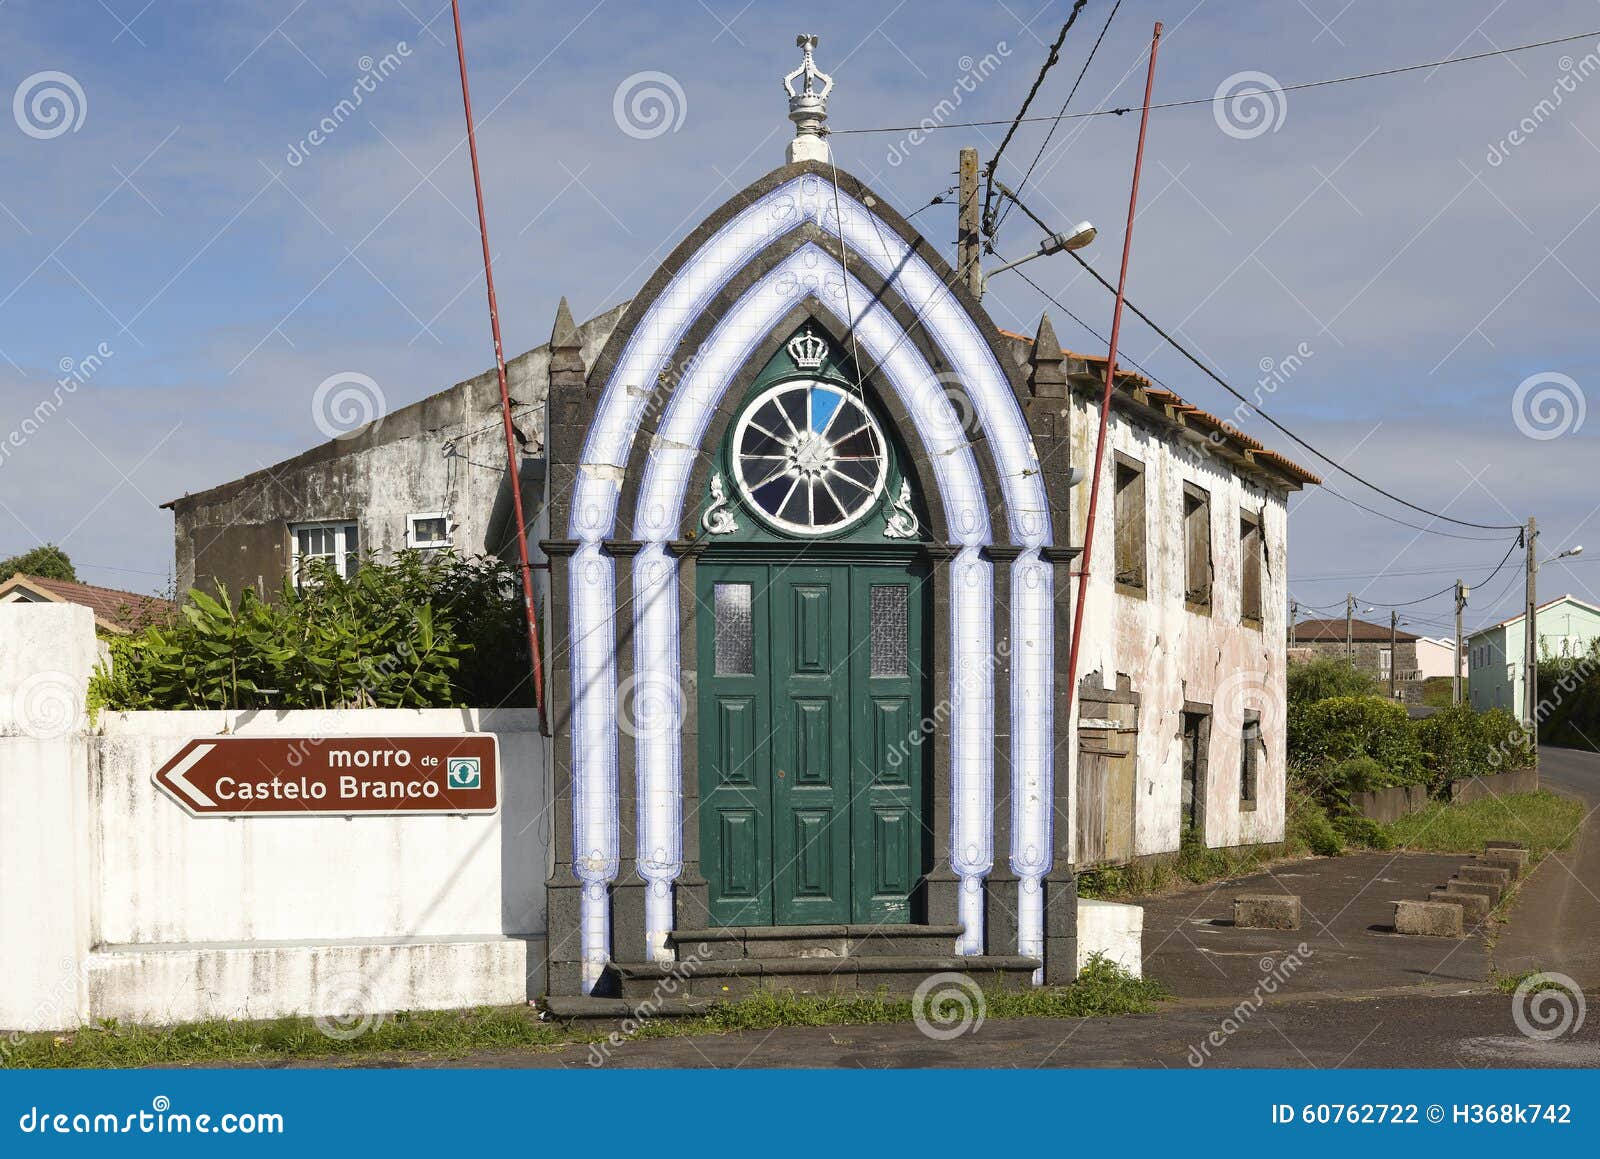 azores traditional chapel, imperio, in faial island. portugal